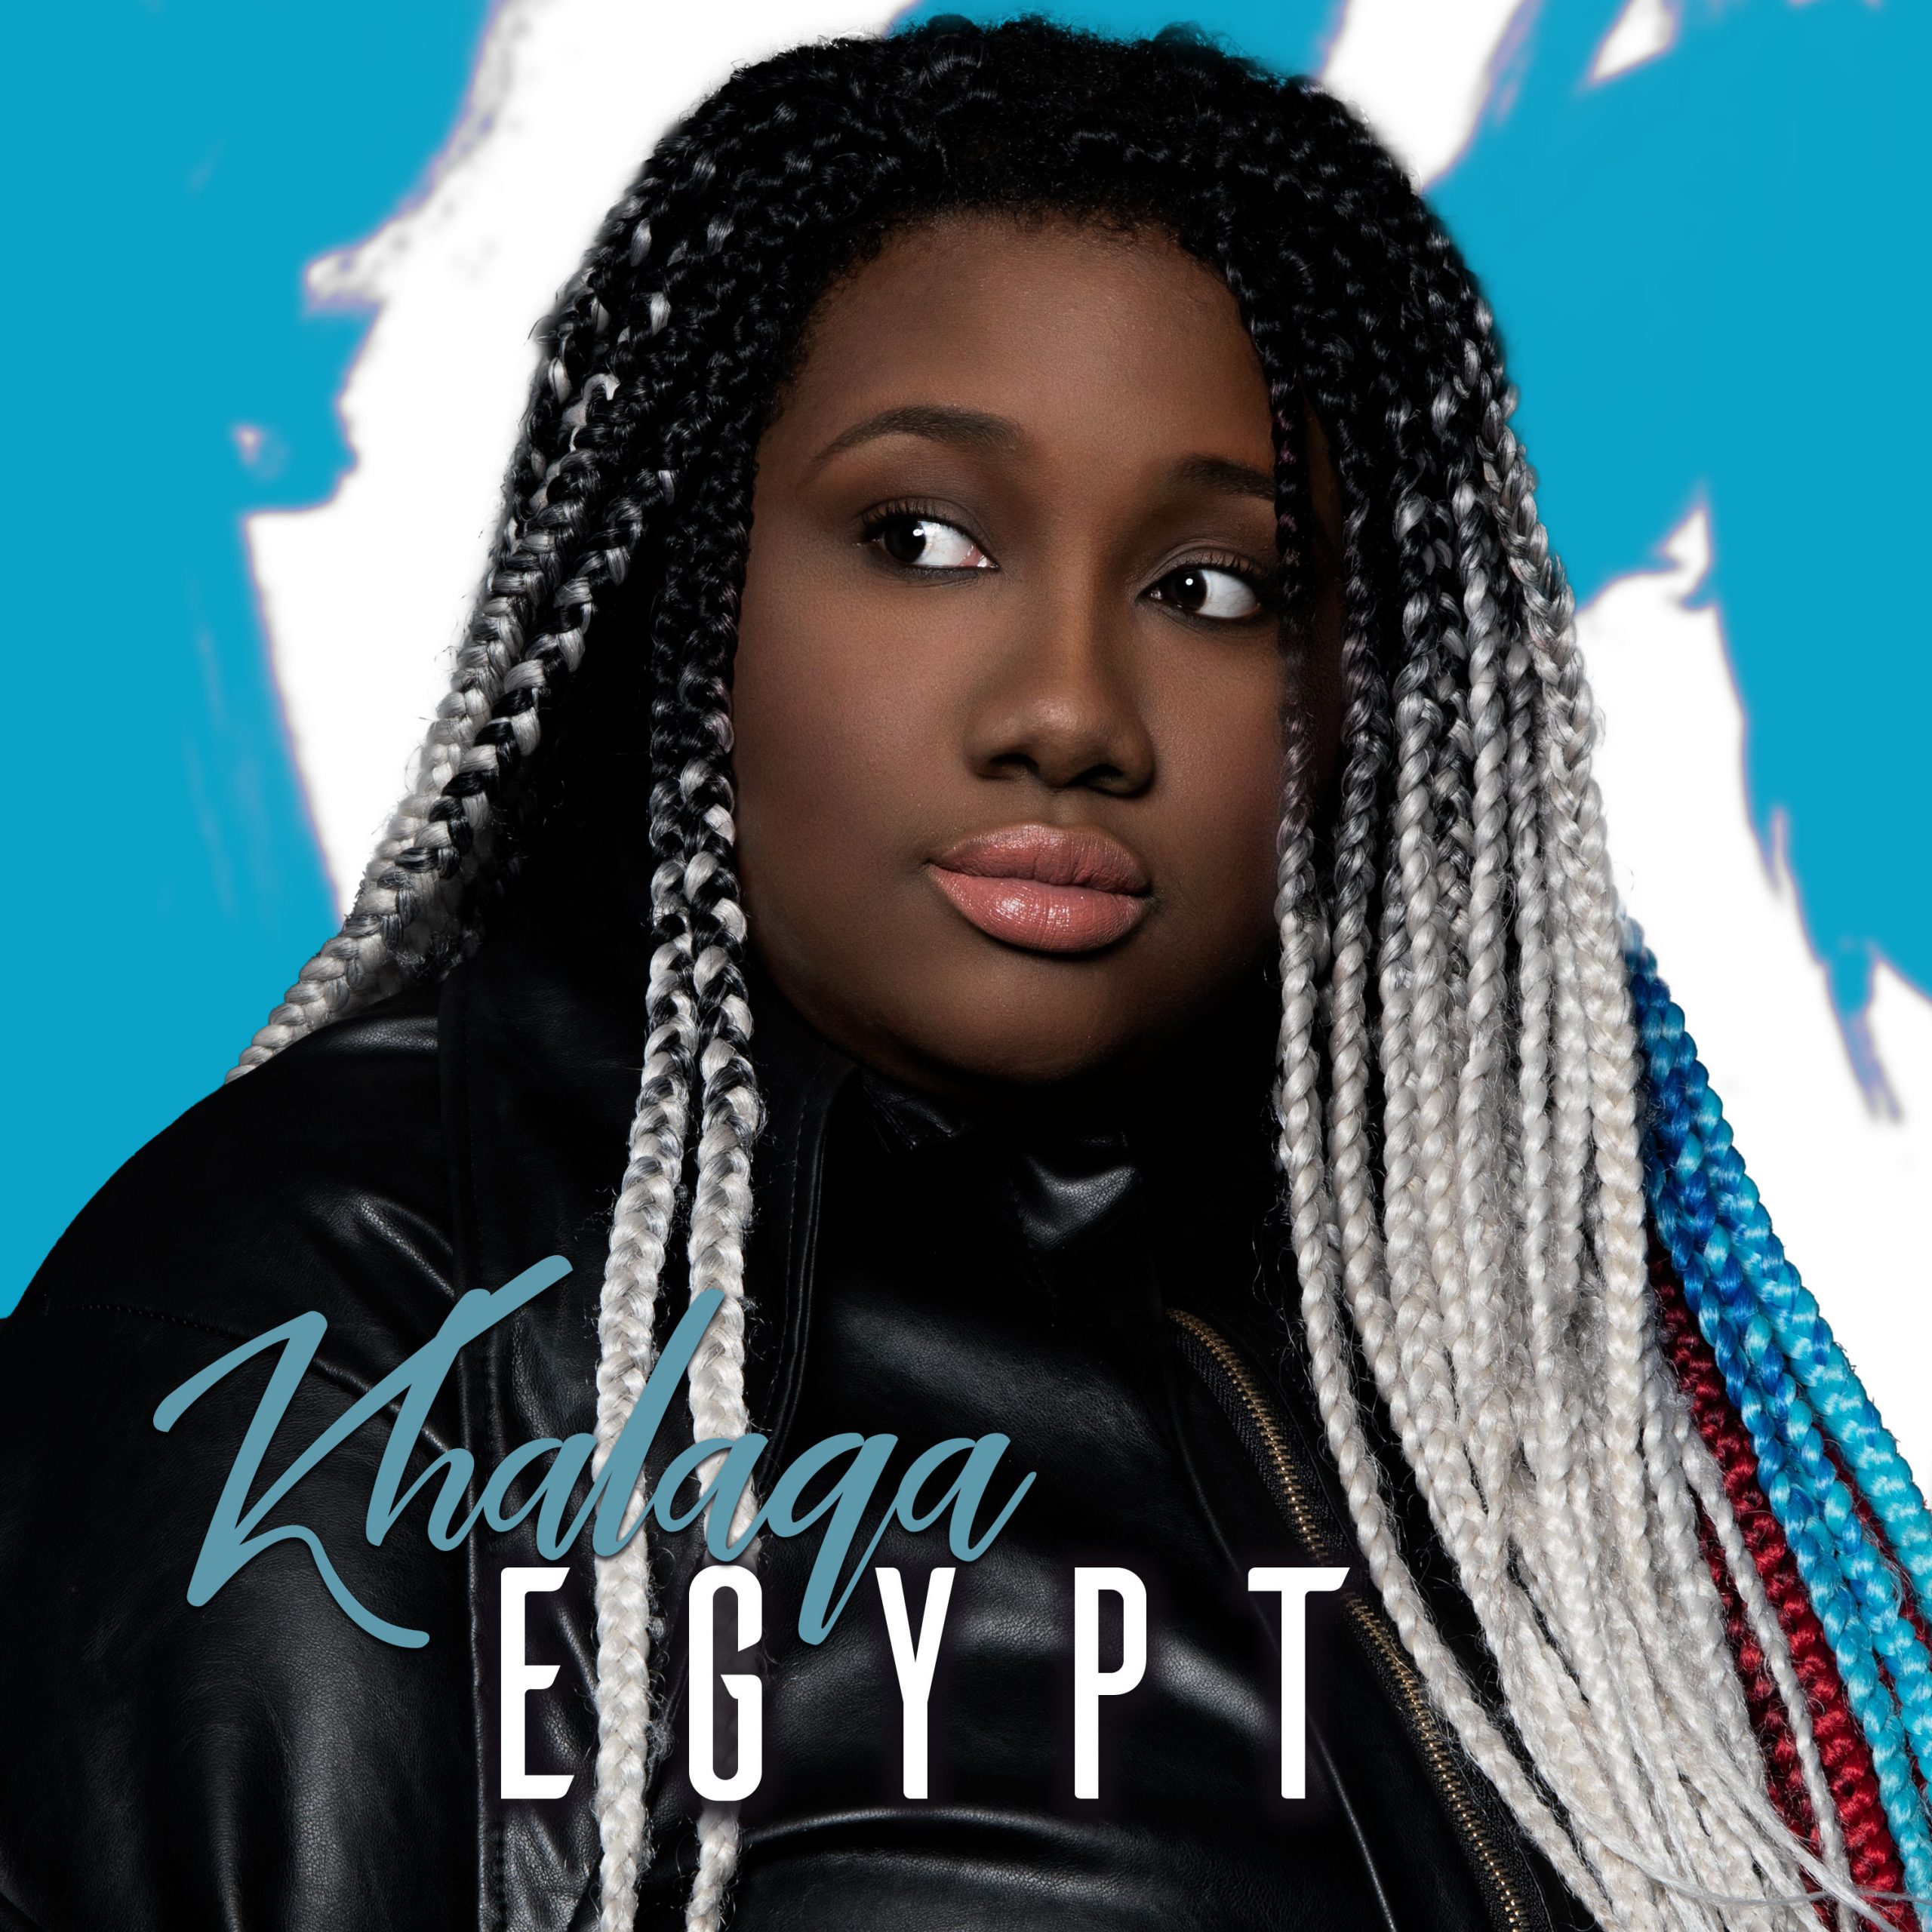 Fast rising Rnb and Hip-Hop songstress ‘Khalaqa’ drops her debut EP ‘Egypt’